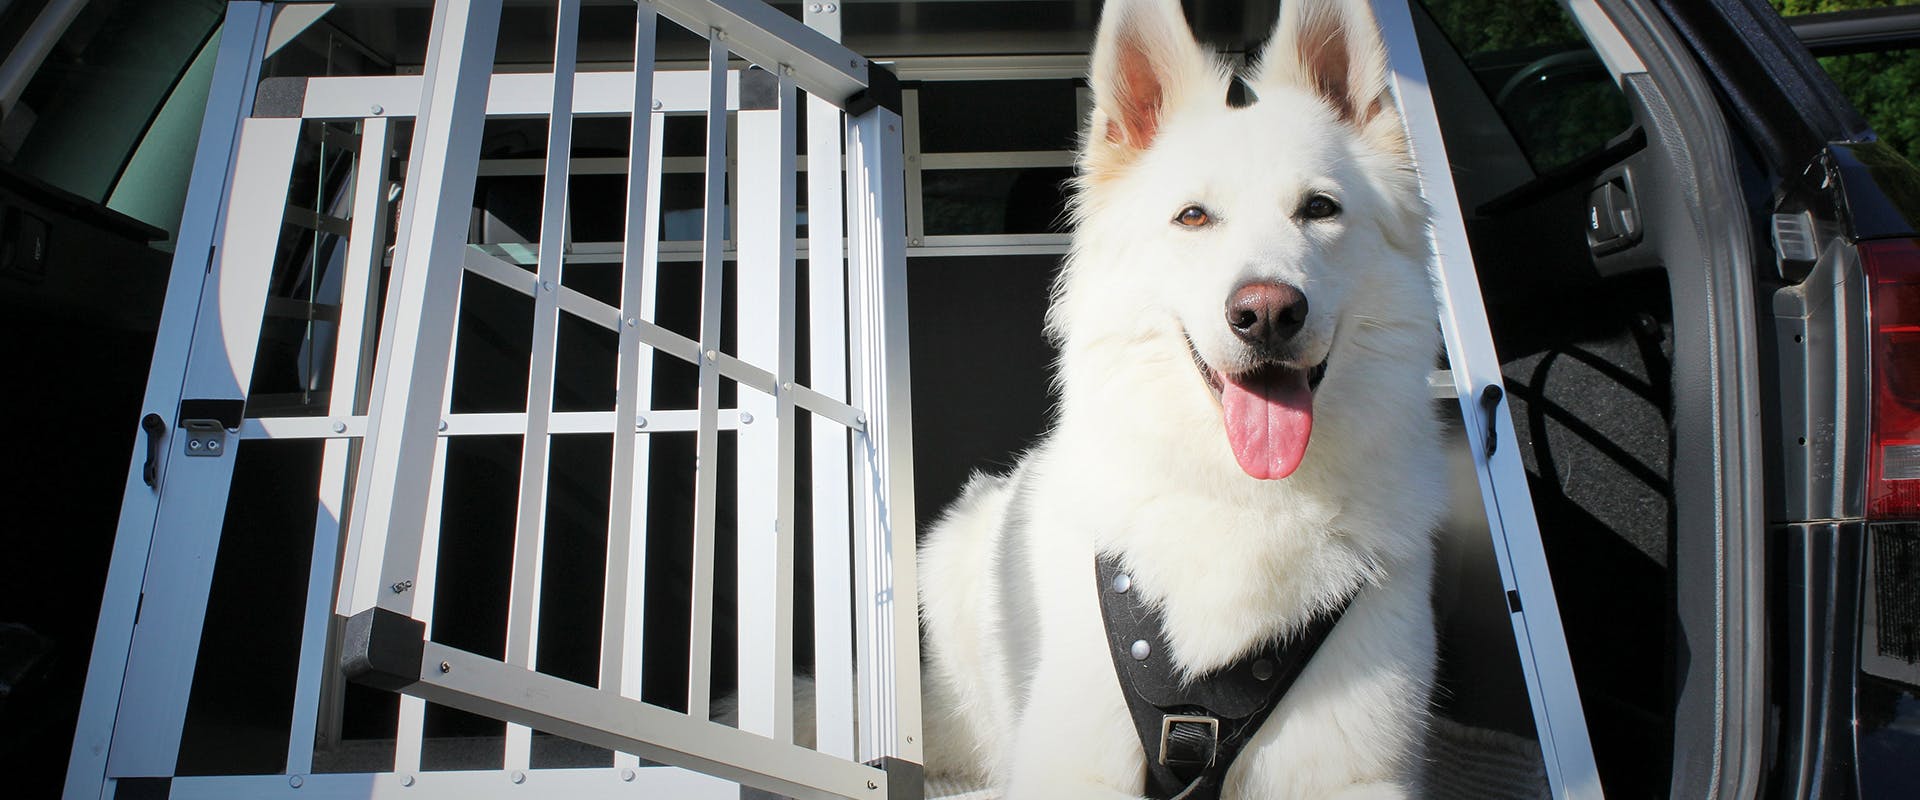 A large white dog sitting in a dog travel crate